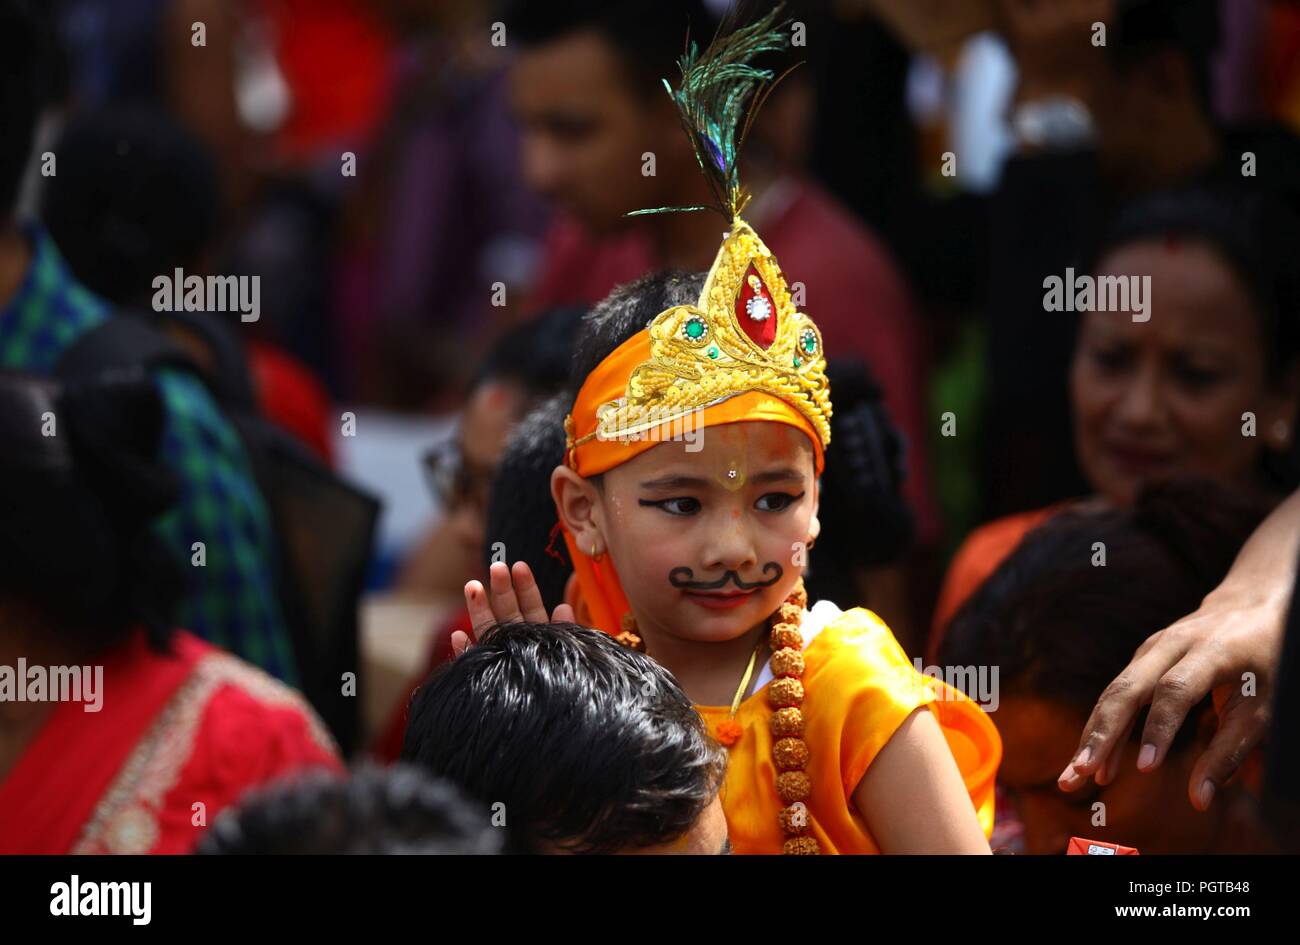 Kathmandu, Nepal. 27th Aug, 2018. A Kid dressed up as Lord Krishna takes part in celebration of Gaijatra festival or the festival of cows in Kathmandu. Hindus celebrated the festival in commemorate of the death loved ones and pray for peace soul honouring cows or decorate people as cow in the streets. Credit: Archana Shrestha/Pacific Press/Alamy Live News Stock Photo